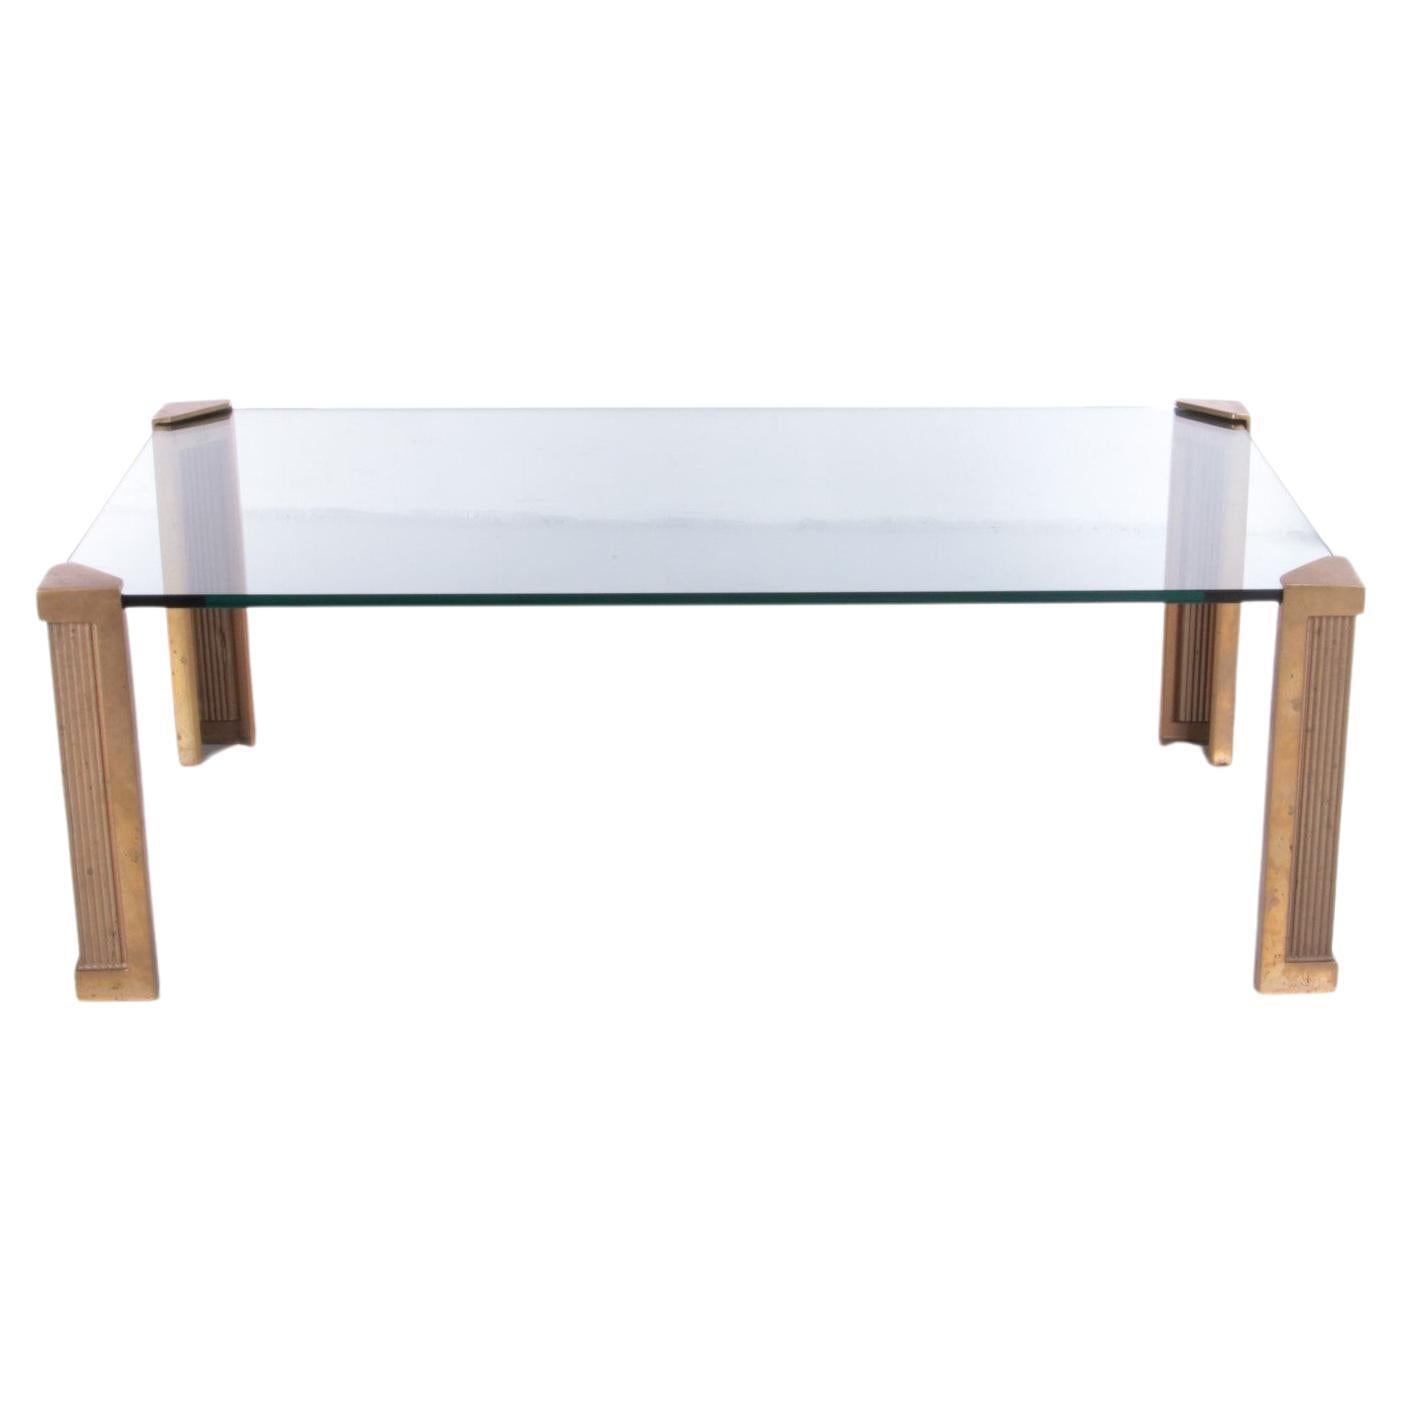 Coffee table T14 design by Peter Ghyczy 1970s.